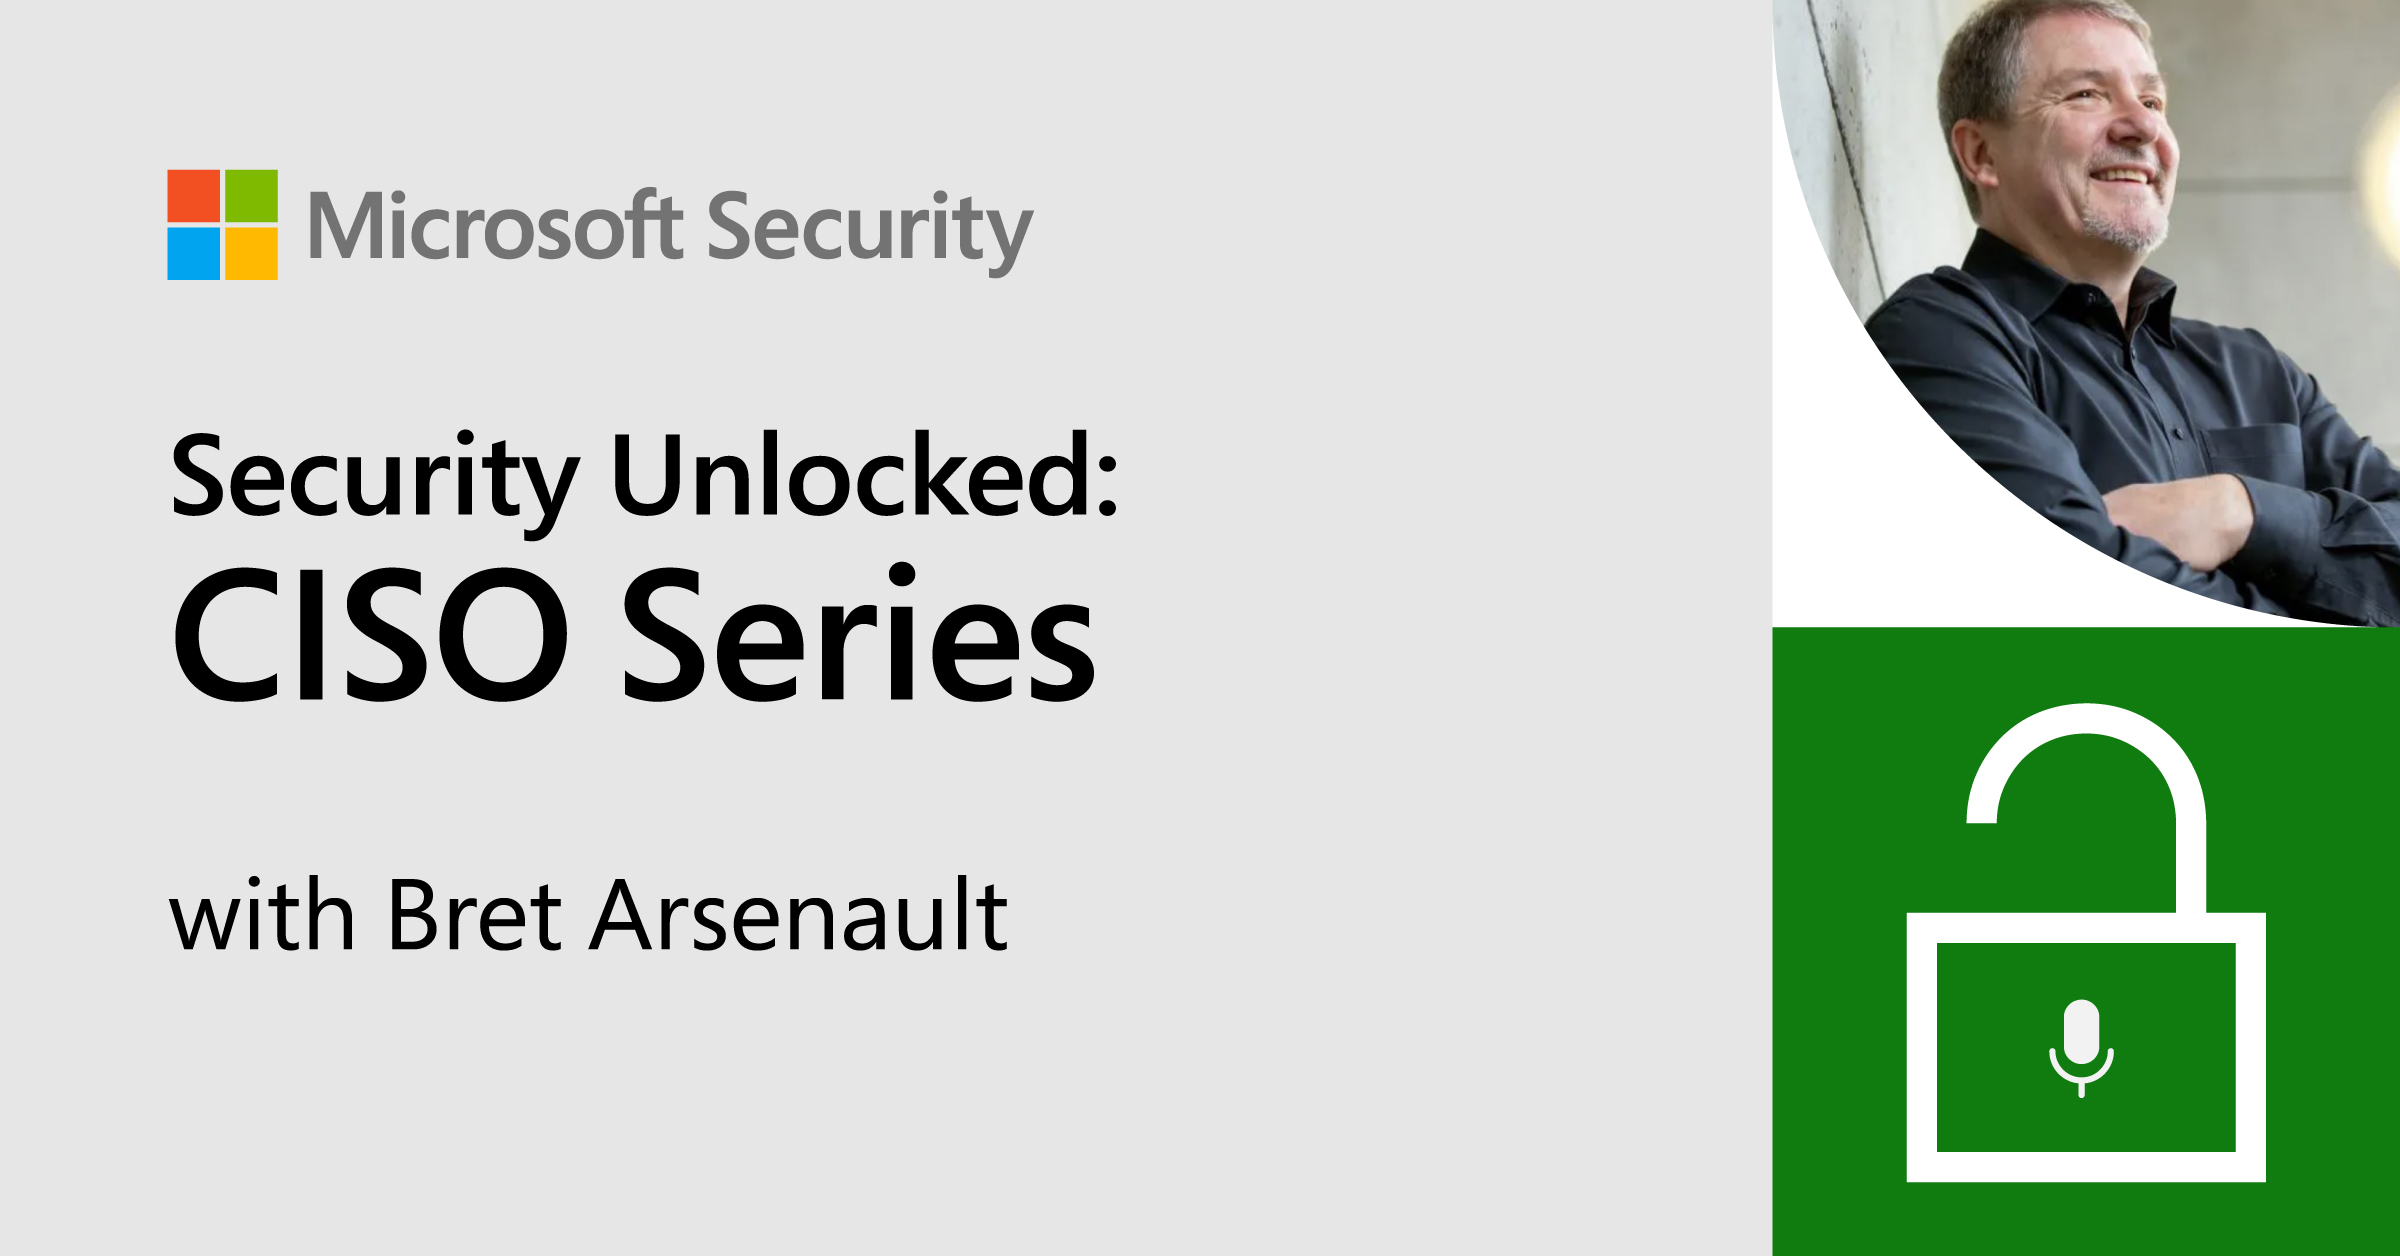 Security Unlocked: CISO Series with Bret Arsenault 7.7.21